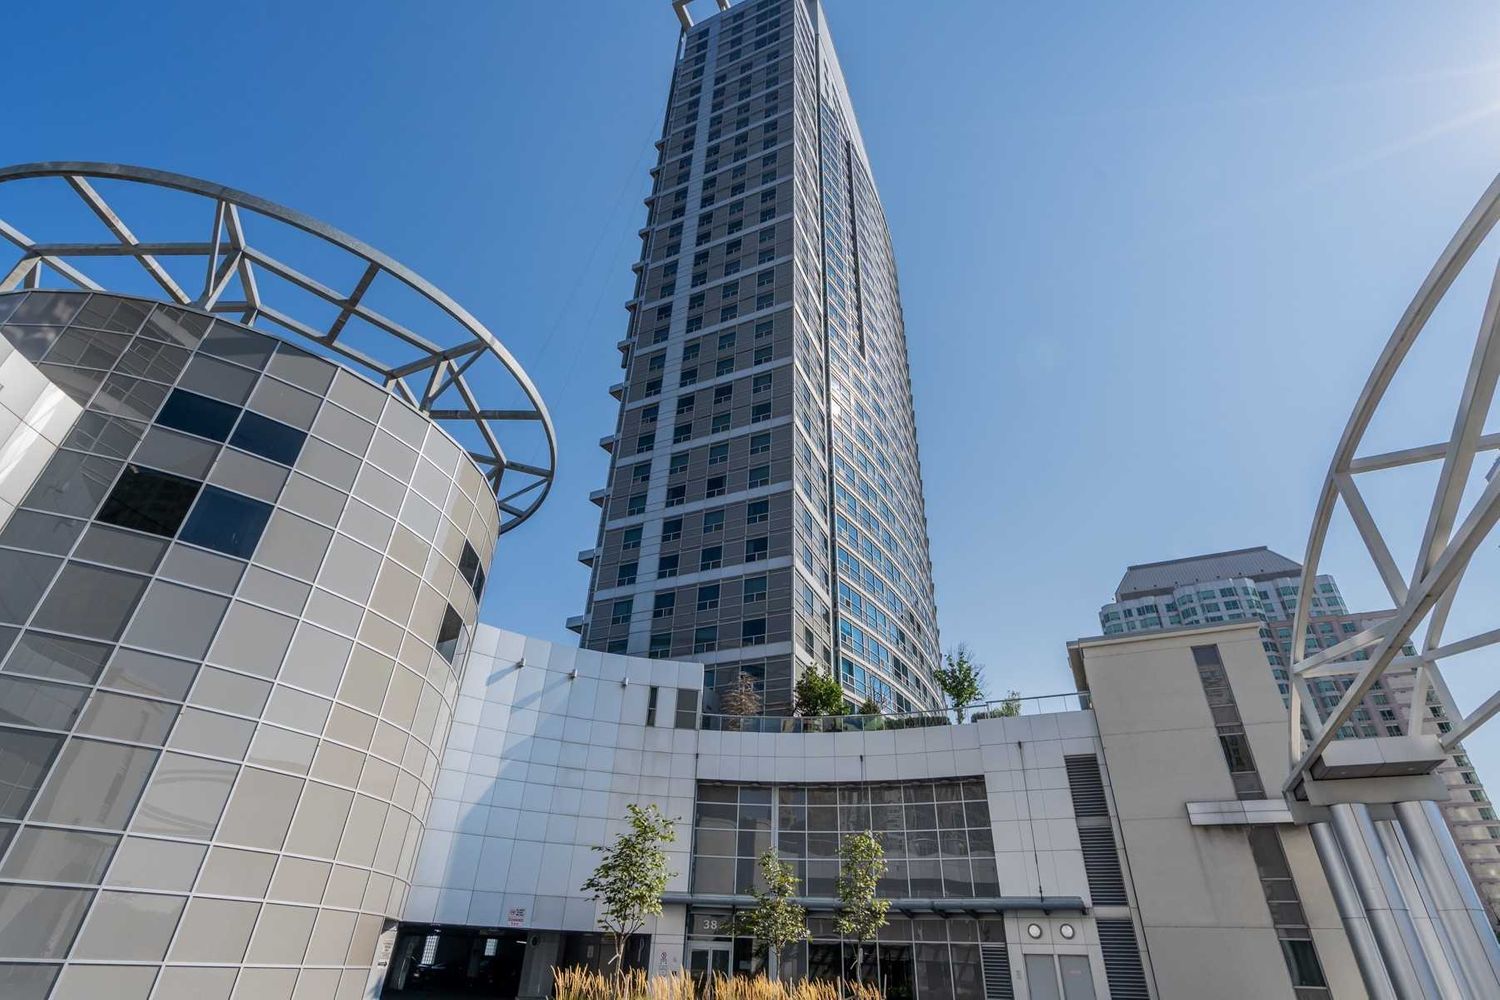 38 Lee Centre Drive. Ellipse - East Tower Condos is located in  Scarborough, Toronto - image #2 of 2